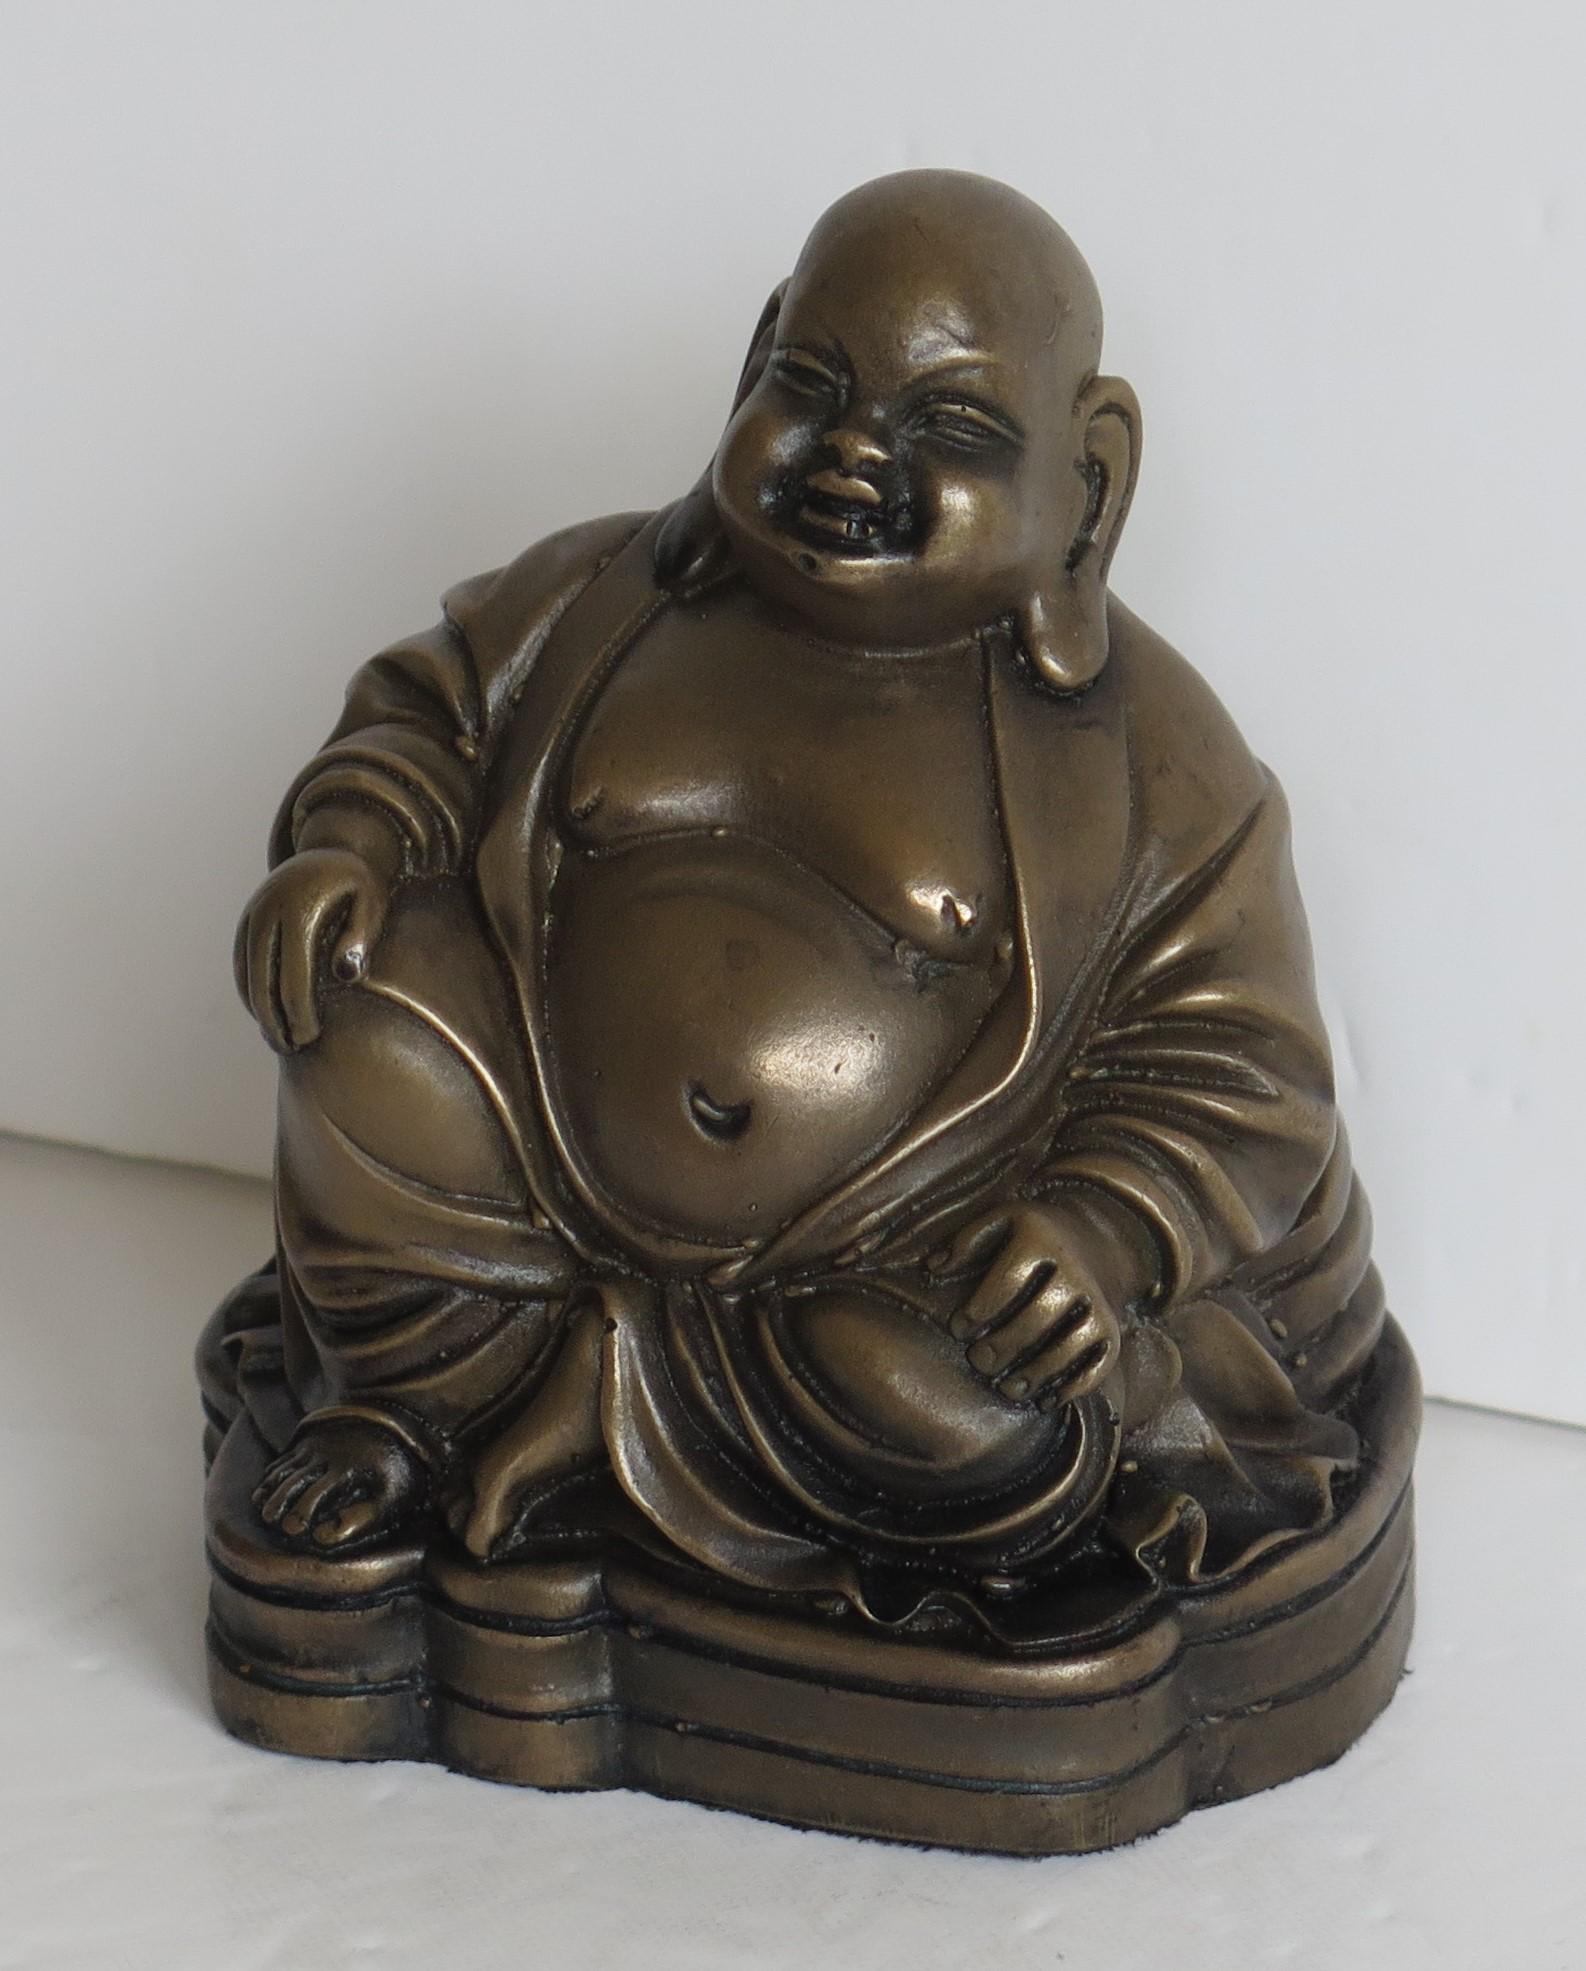 East Asian Bronze Seated Buddha Sculpture or Statue, Circa 1920s